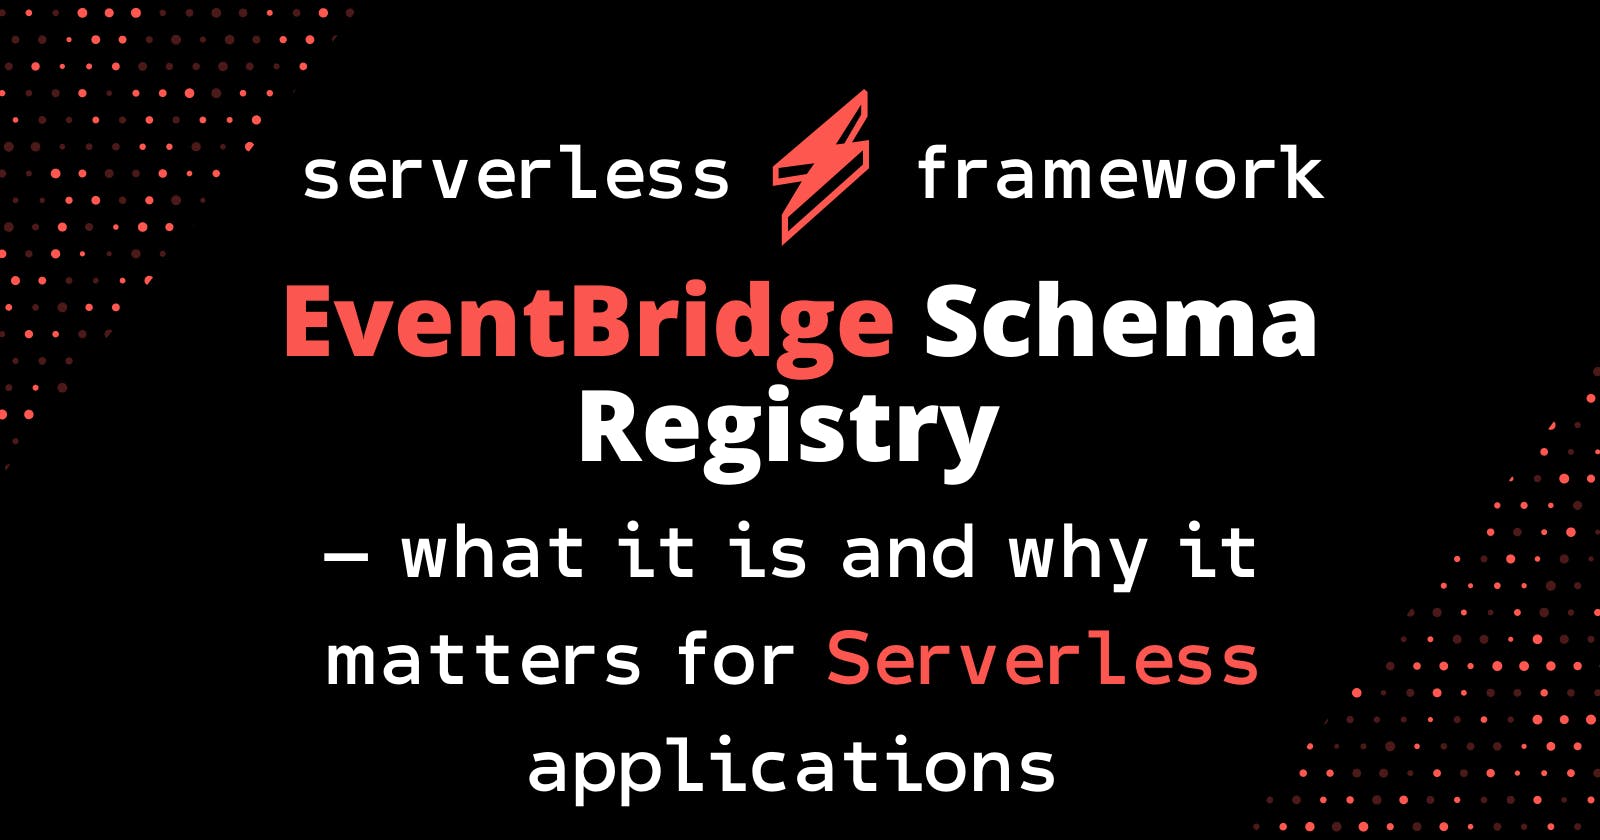 EventBridge Schema Registry -- what it is and why it matters for Serverless applications